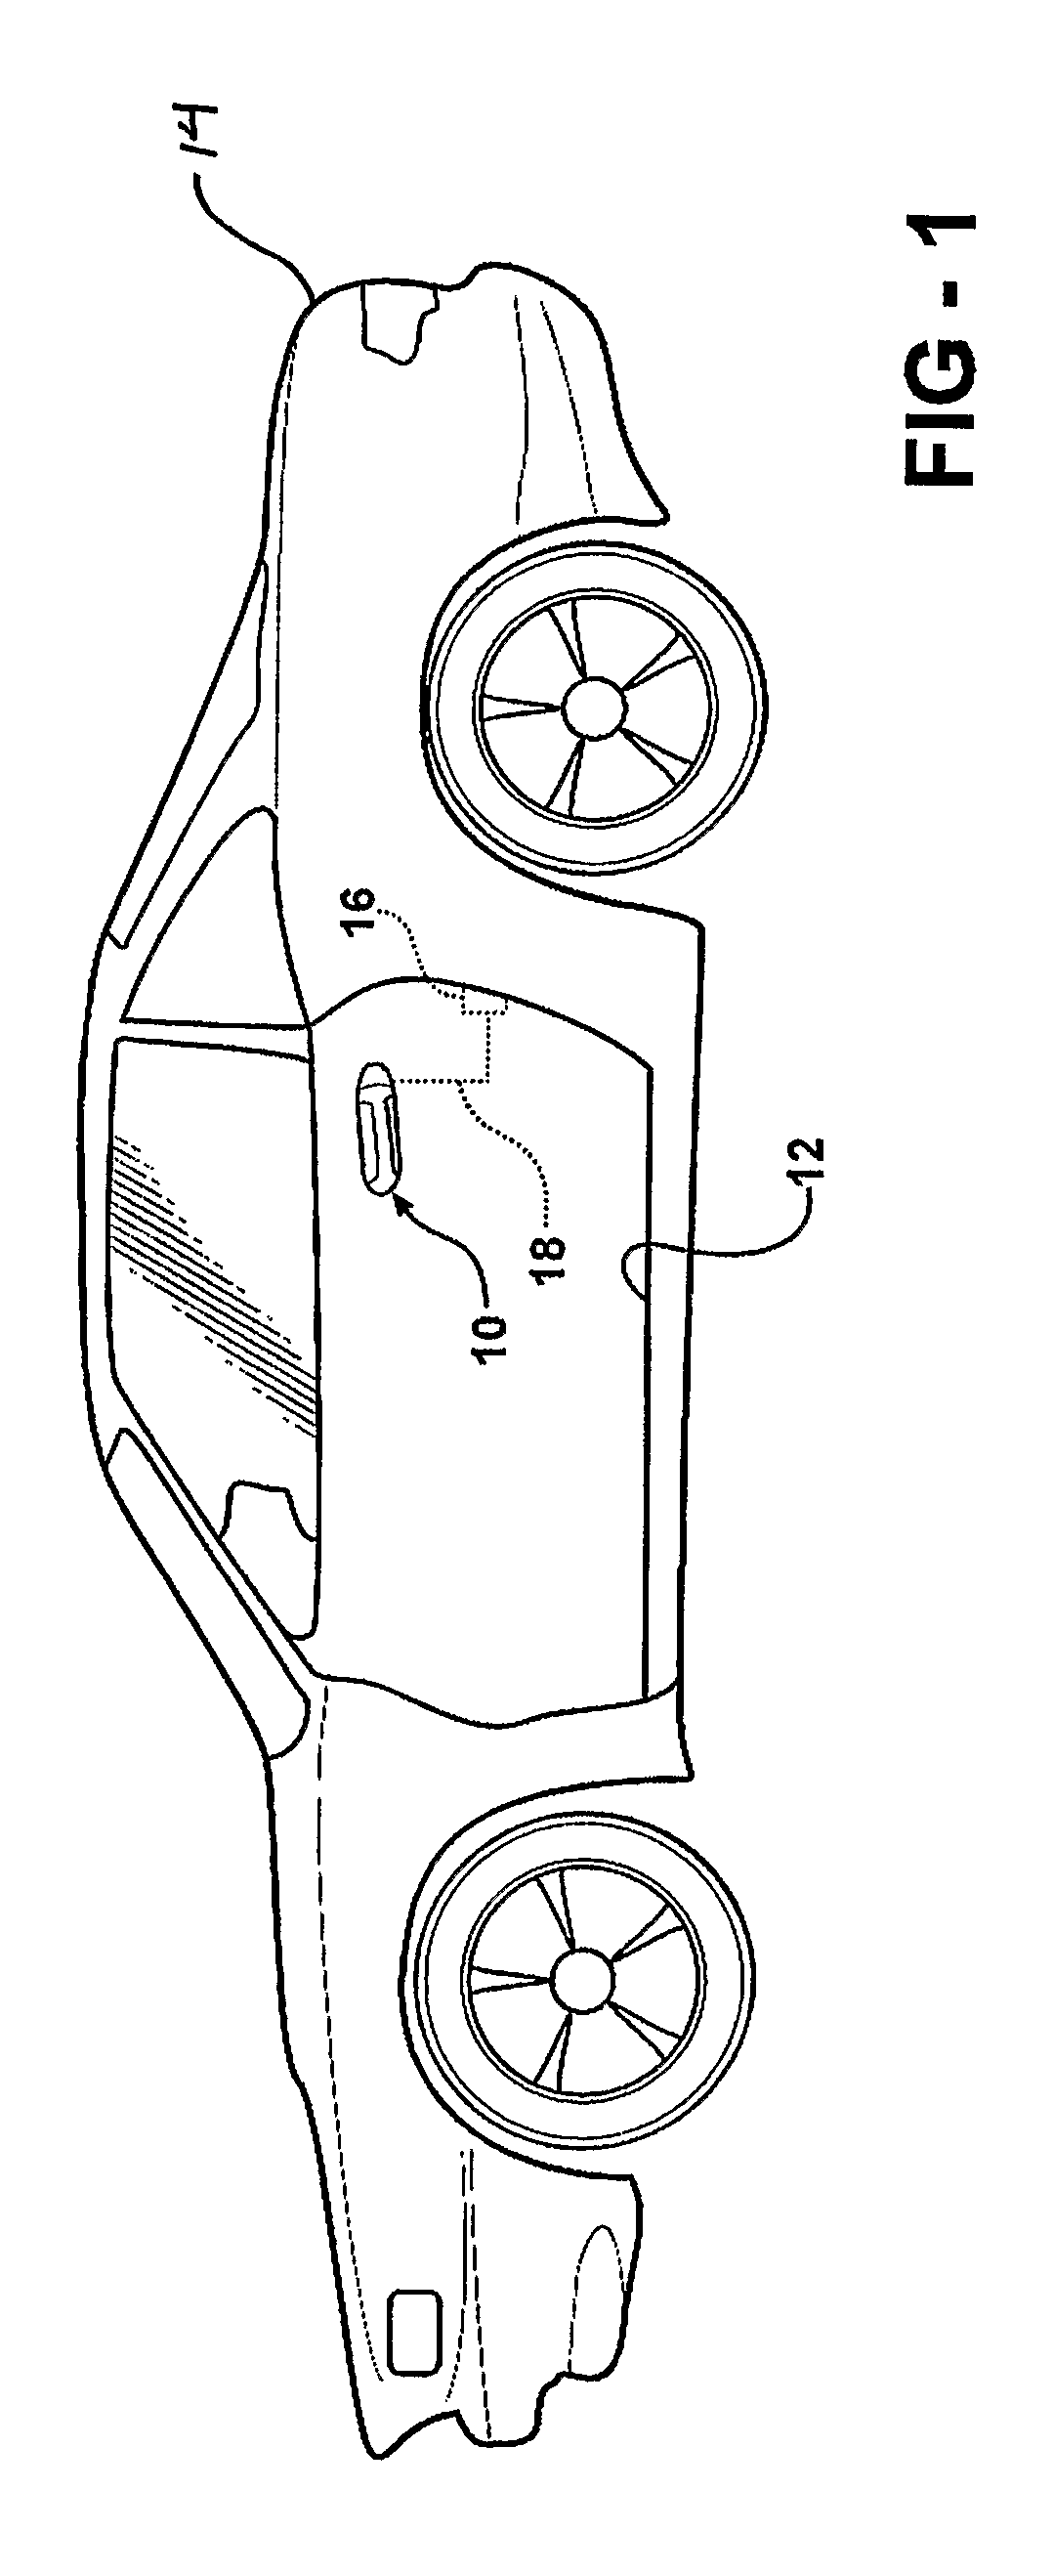 Rotary locking mechanism for outside vehicle door handle